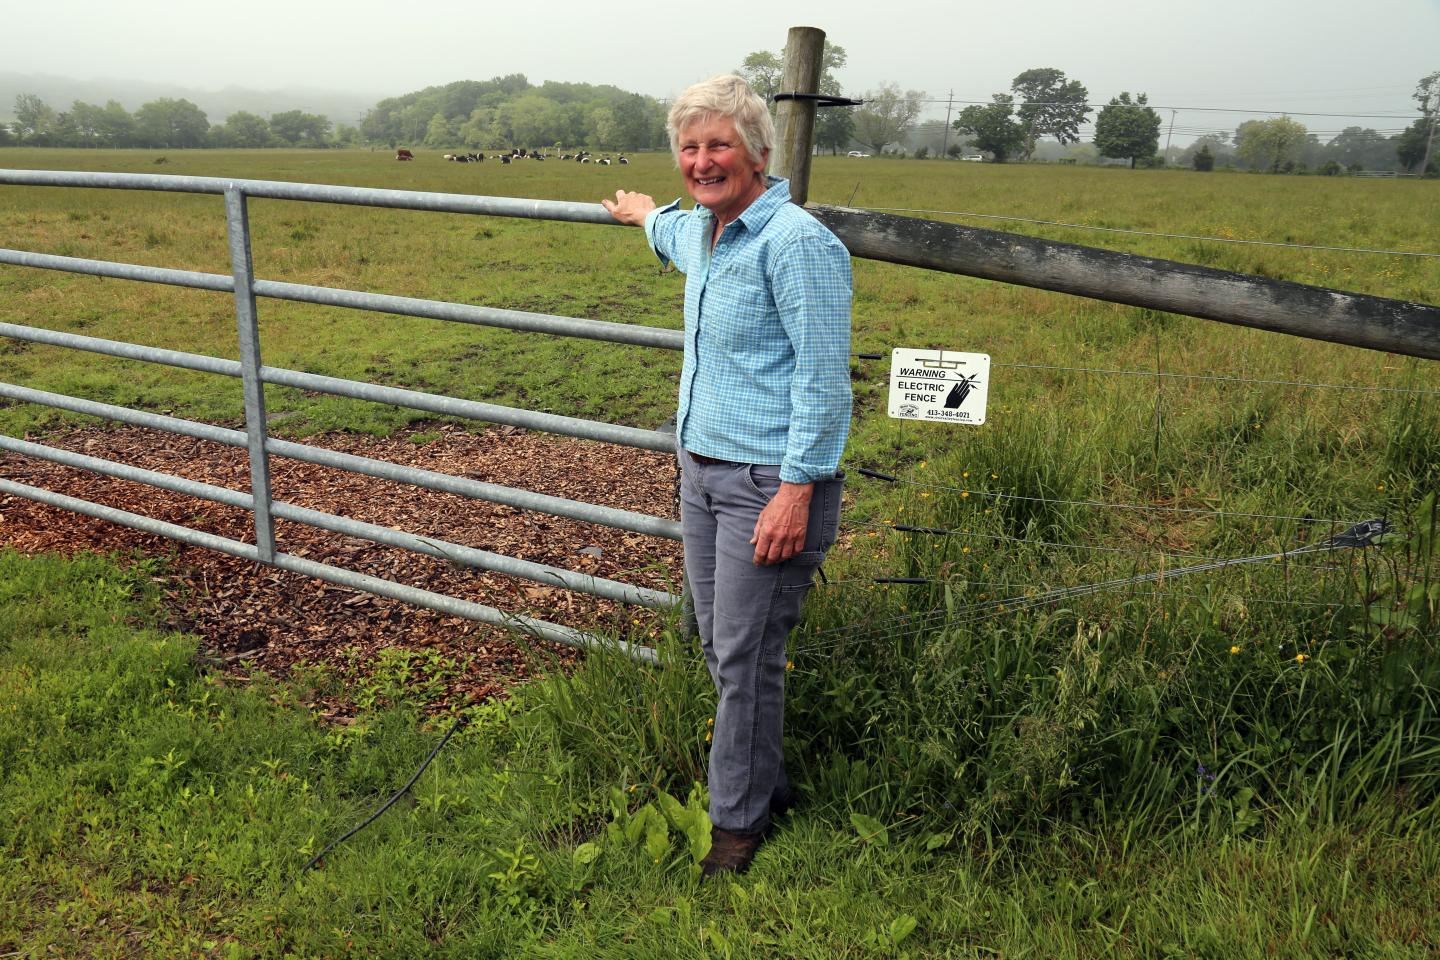 Farmer Martha Neal standing by a fence in a field.